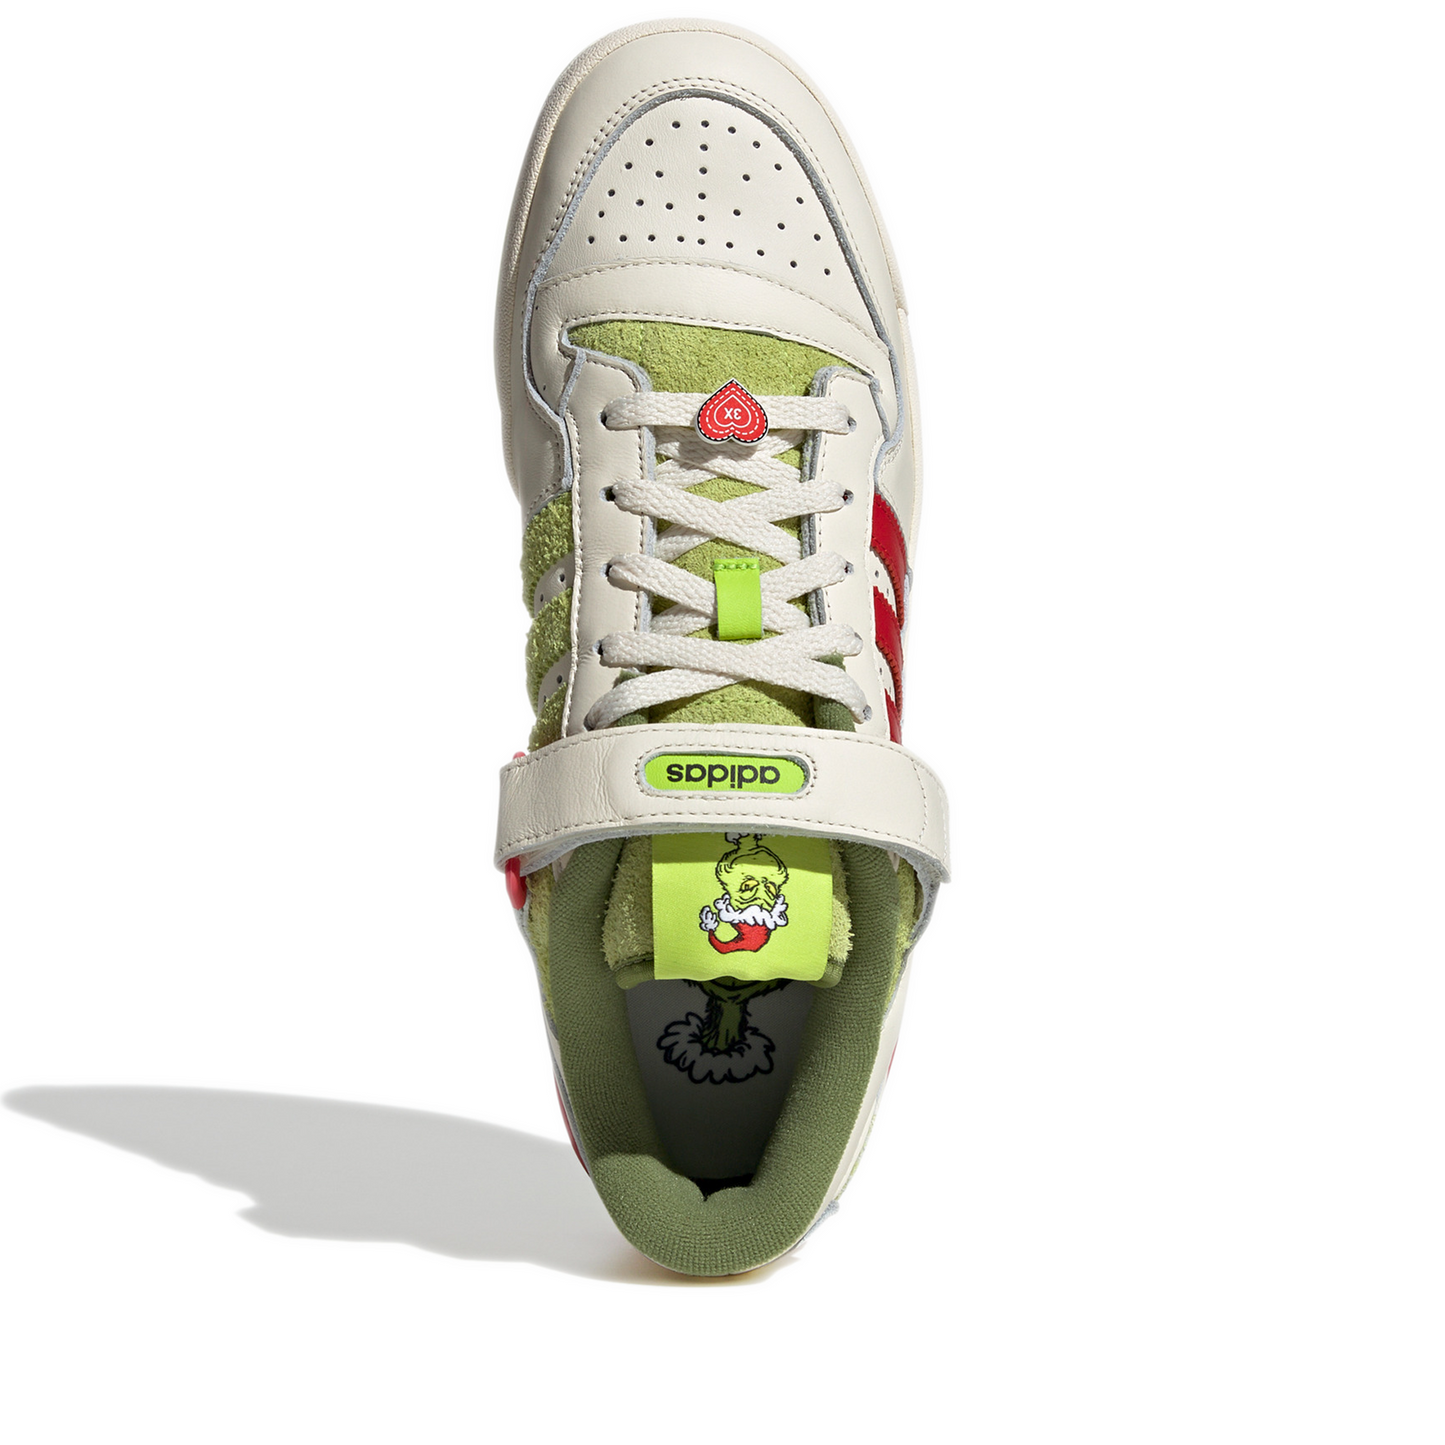 Men's Adidas Forum Low X The Grinch Shoes - White/ Red/ Green